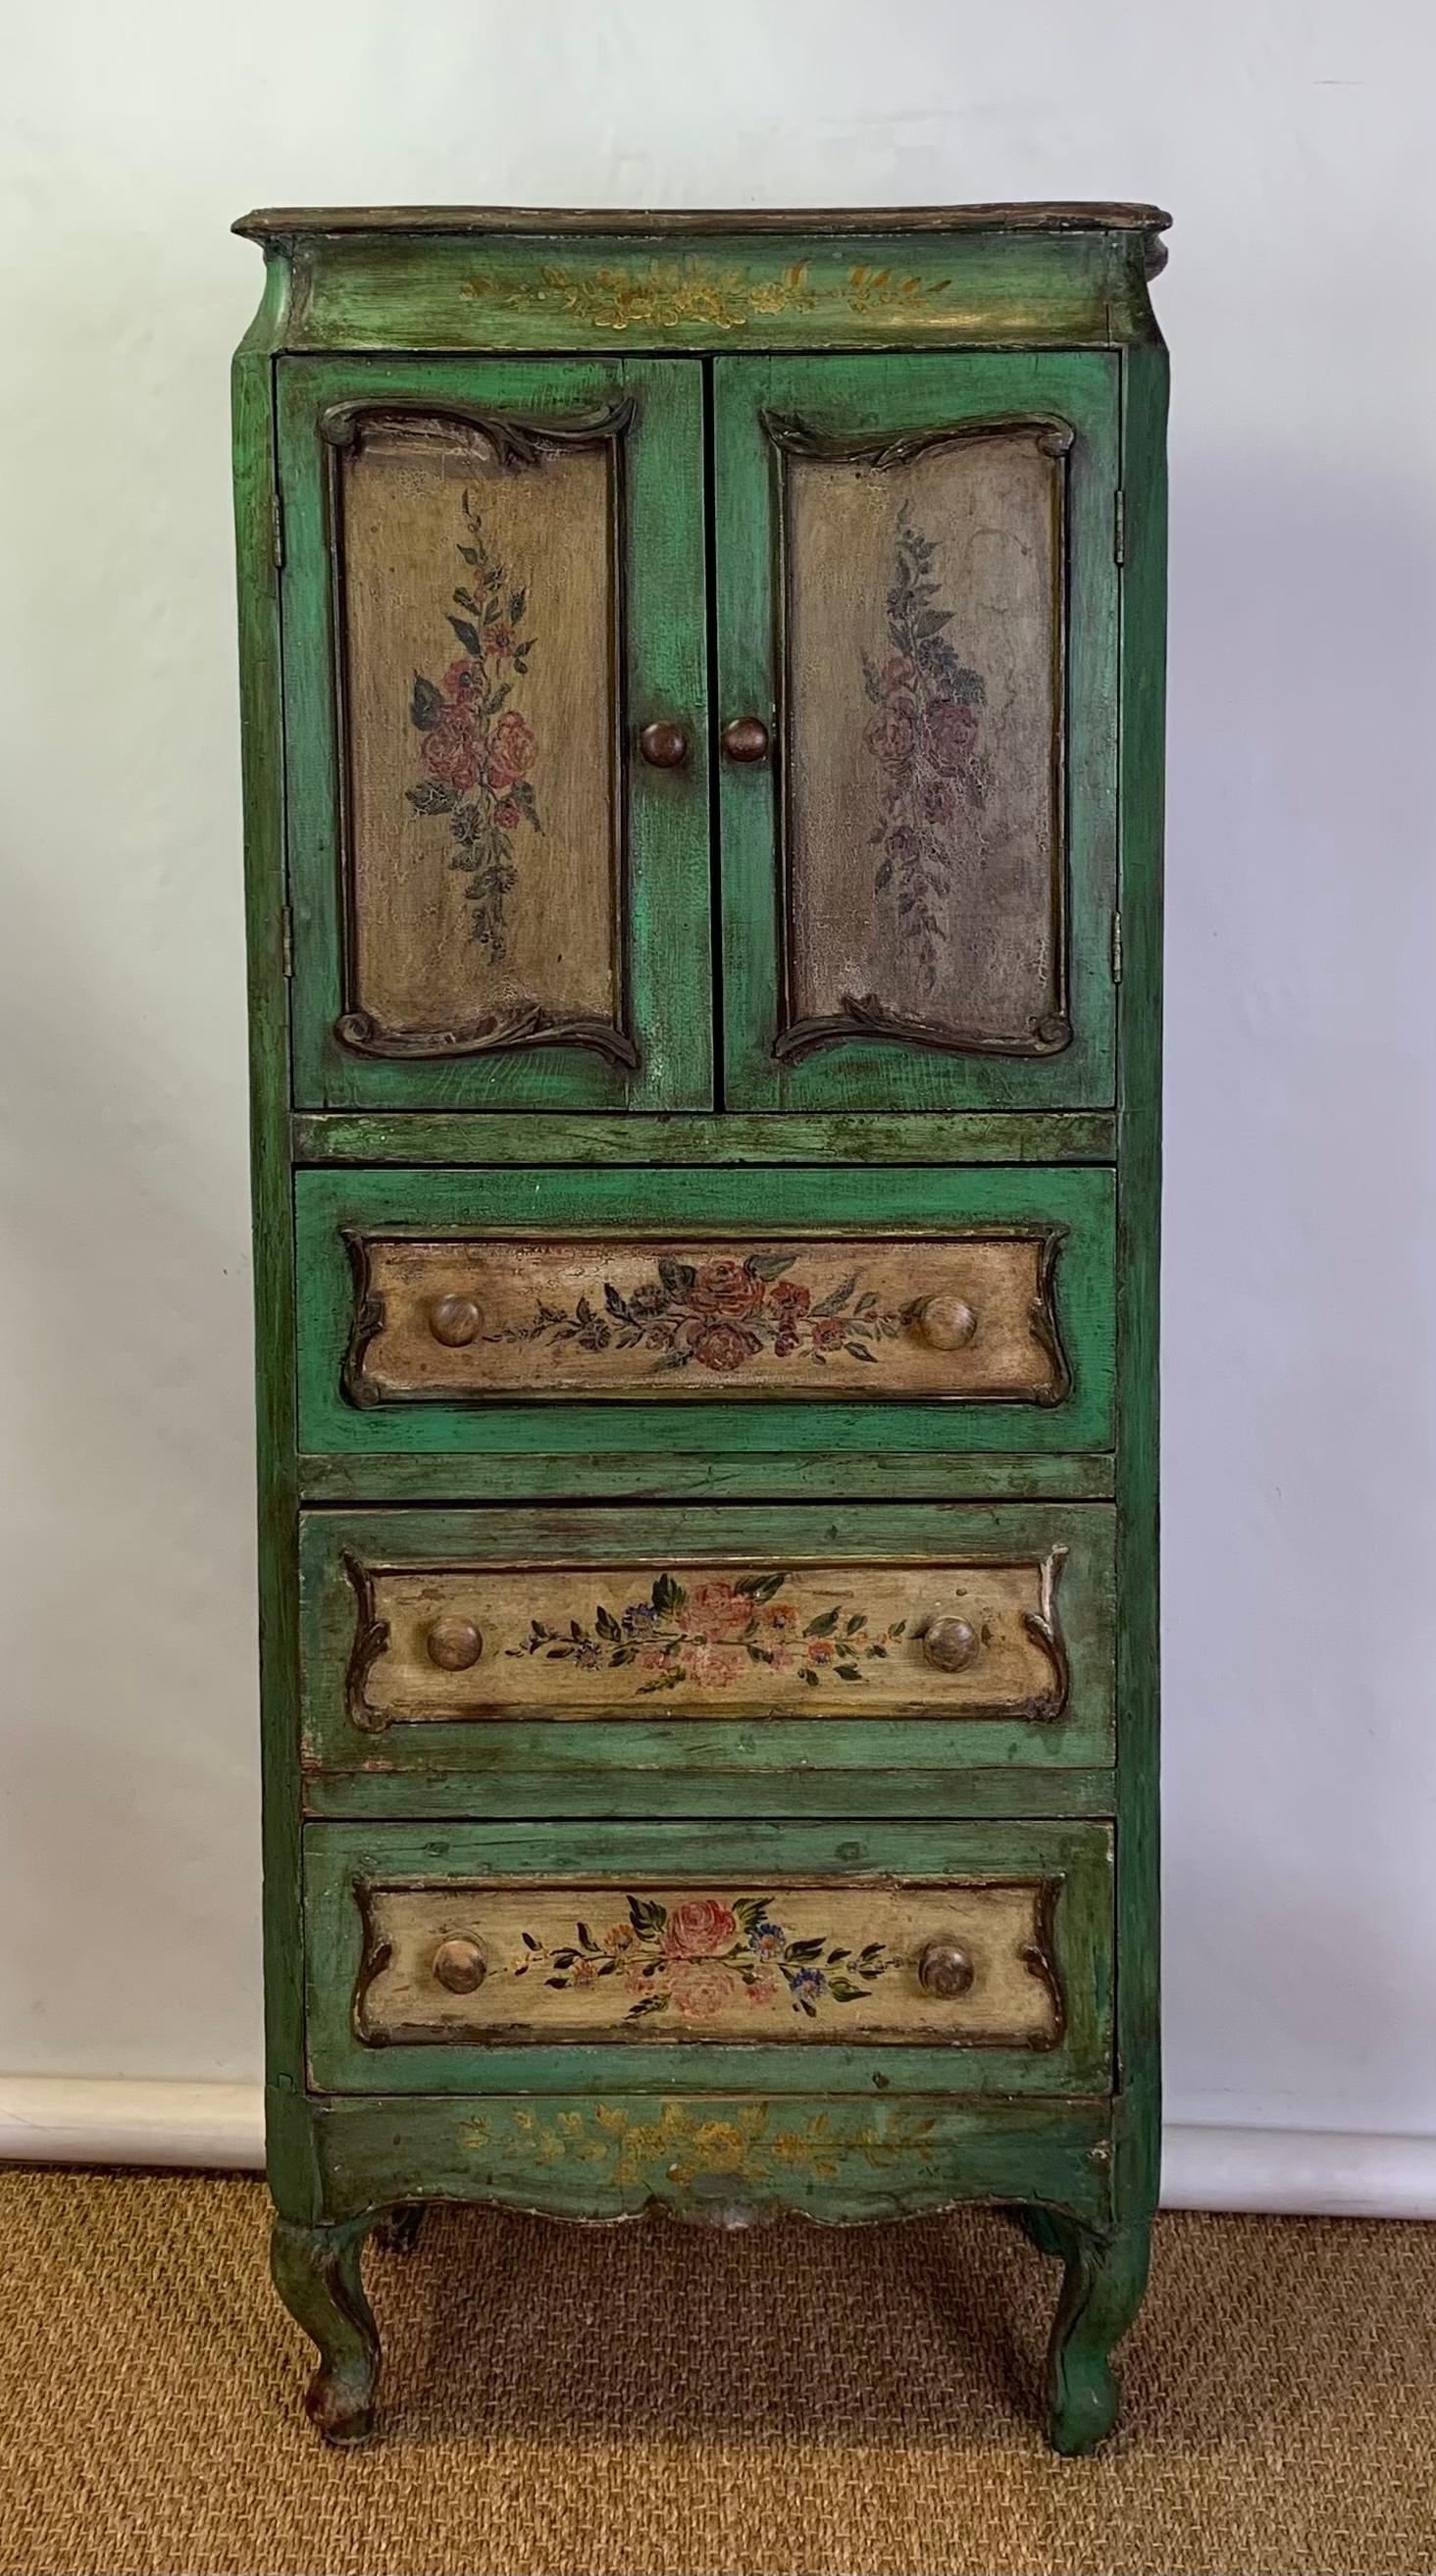 A colorfully painted and decorated late 19th century Italian semanier or lingerie cabinet having two cabinet doors above three drawers resting on cabriole legs.